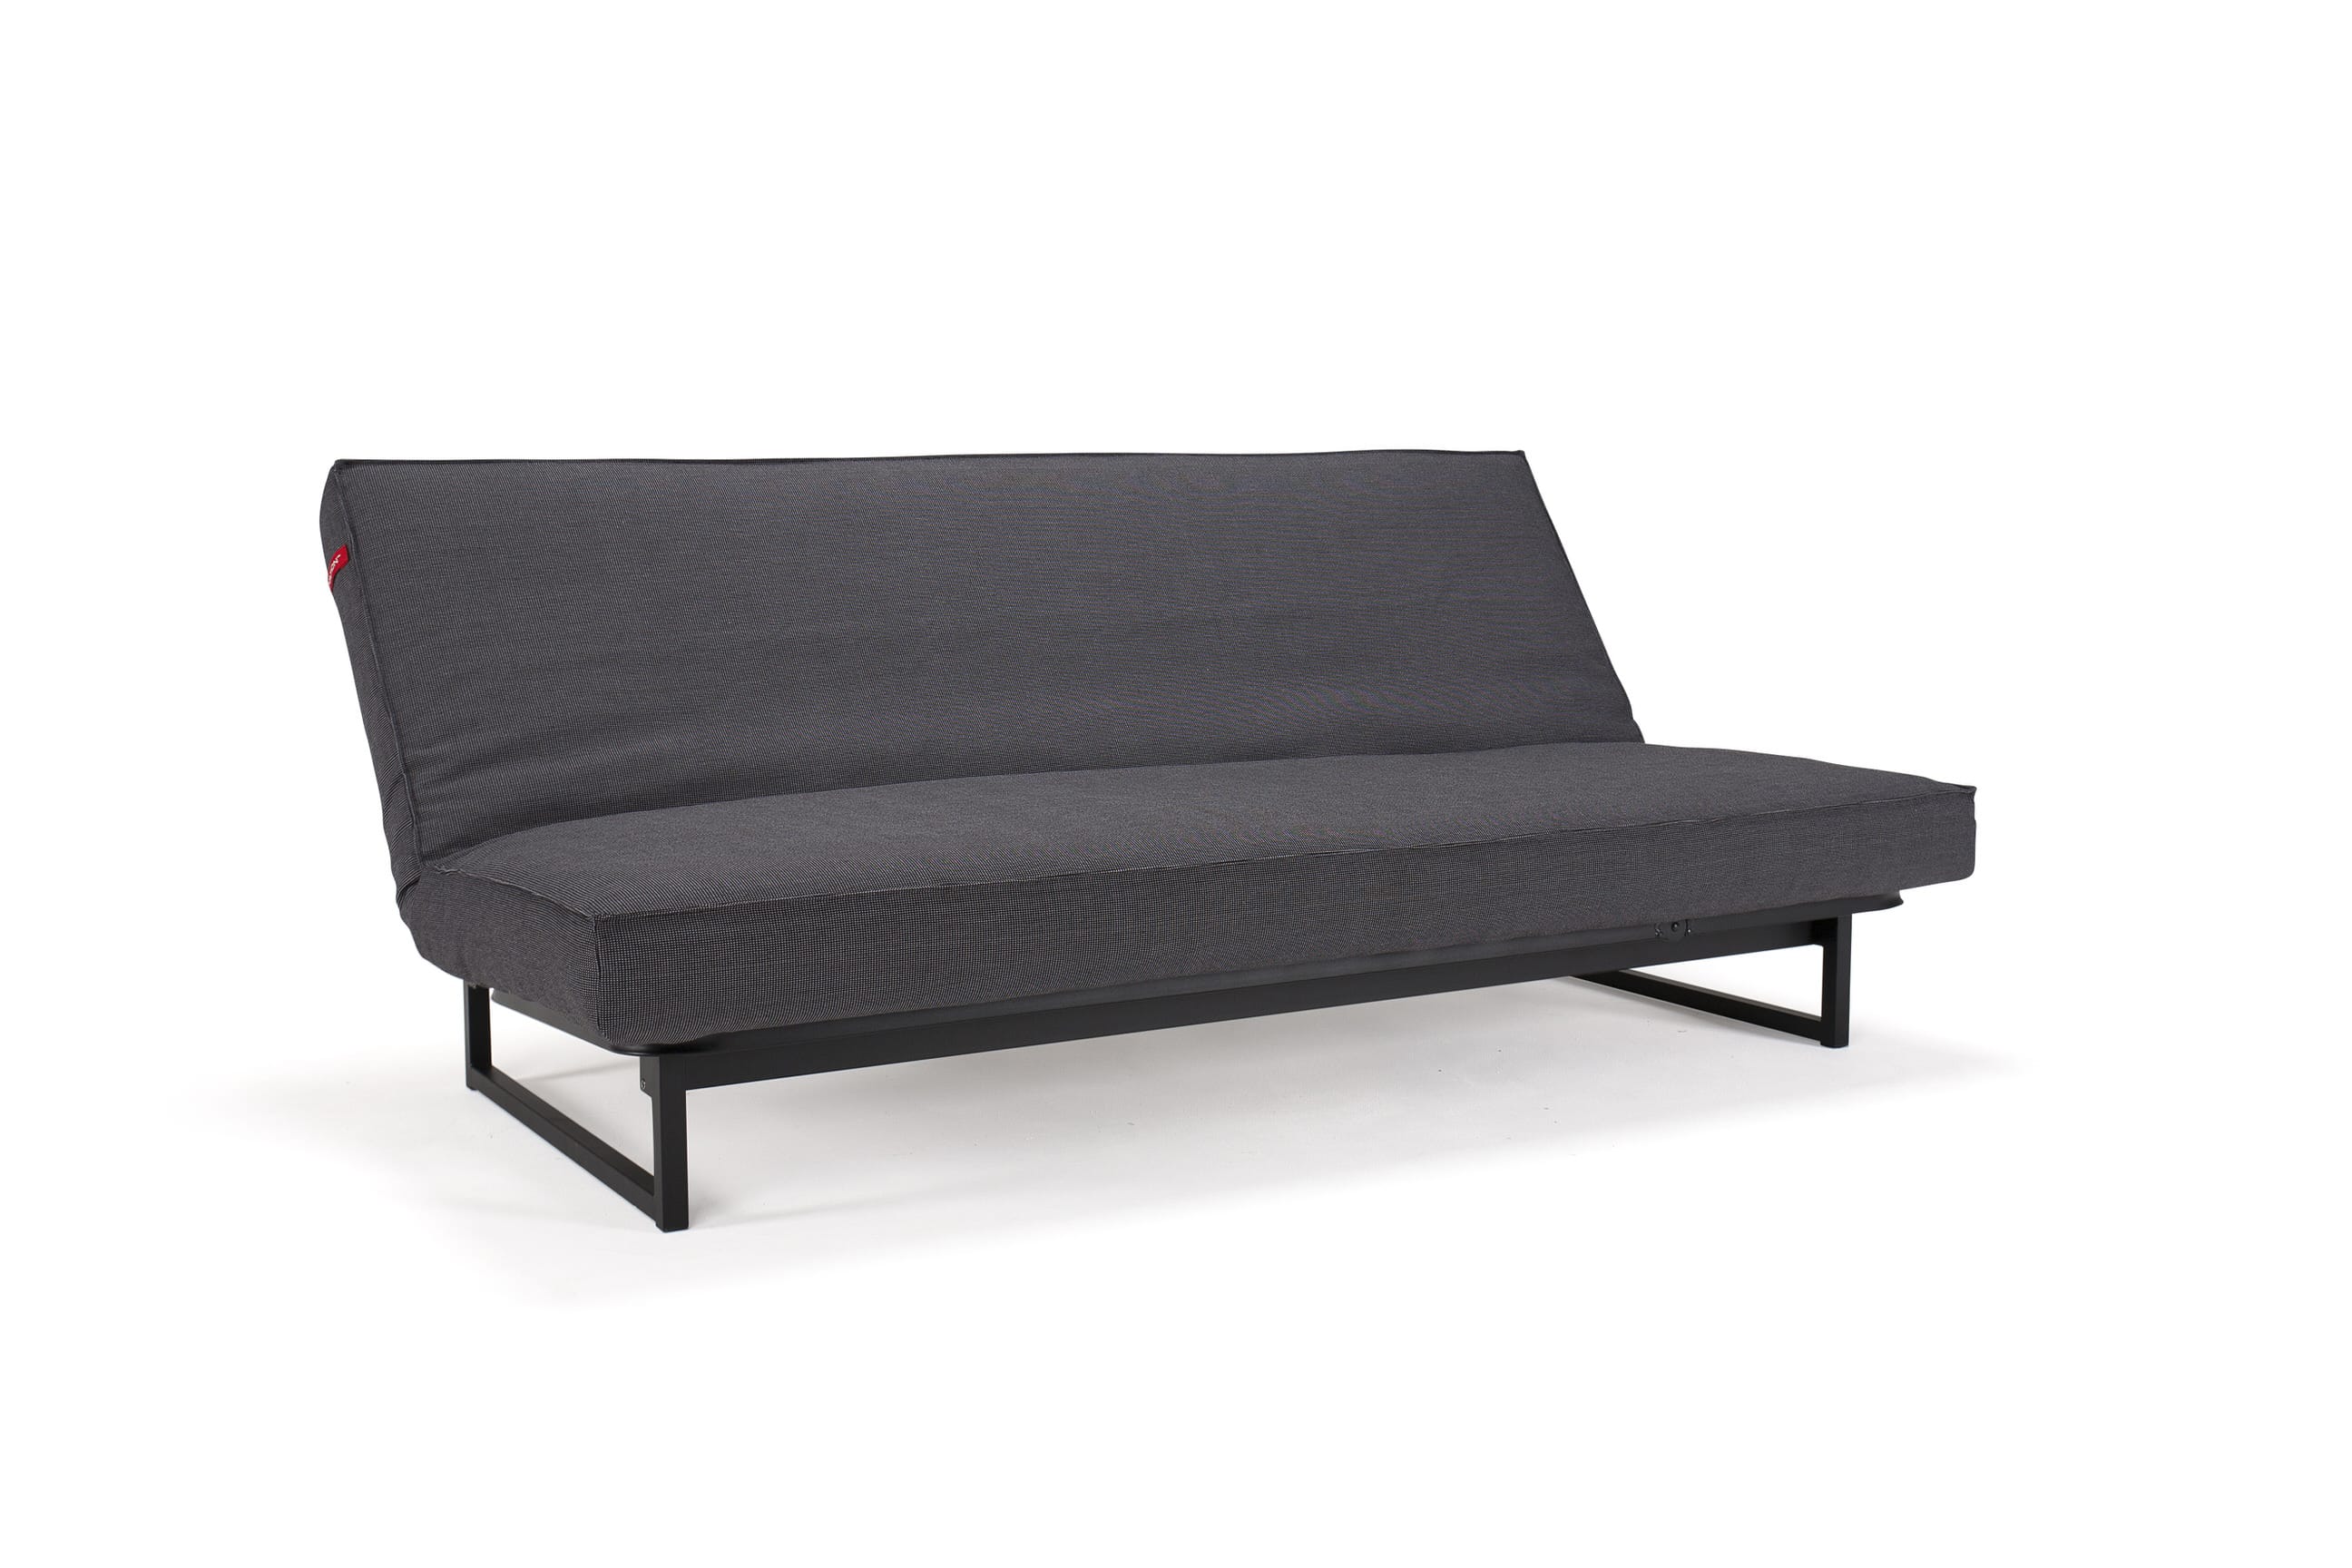 Fraction Futon Sofa Bed (Full XL) by Innovation